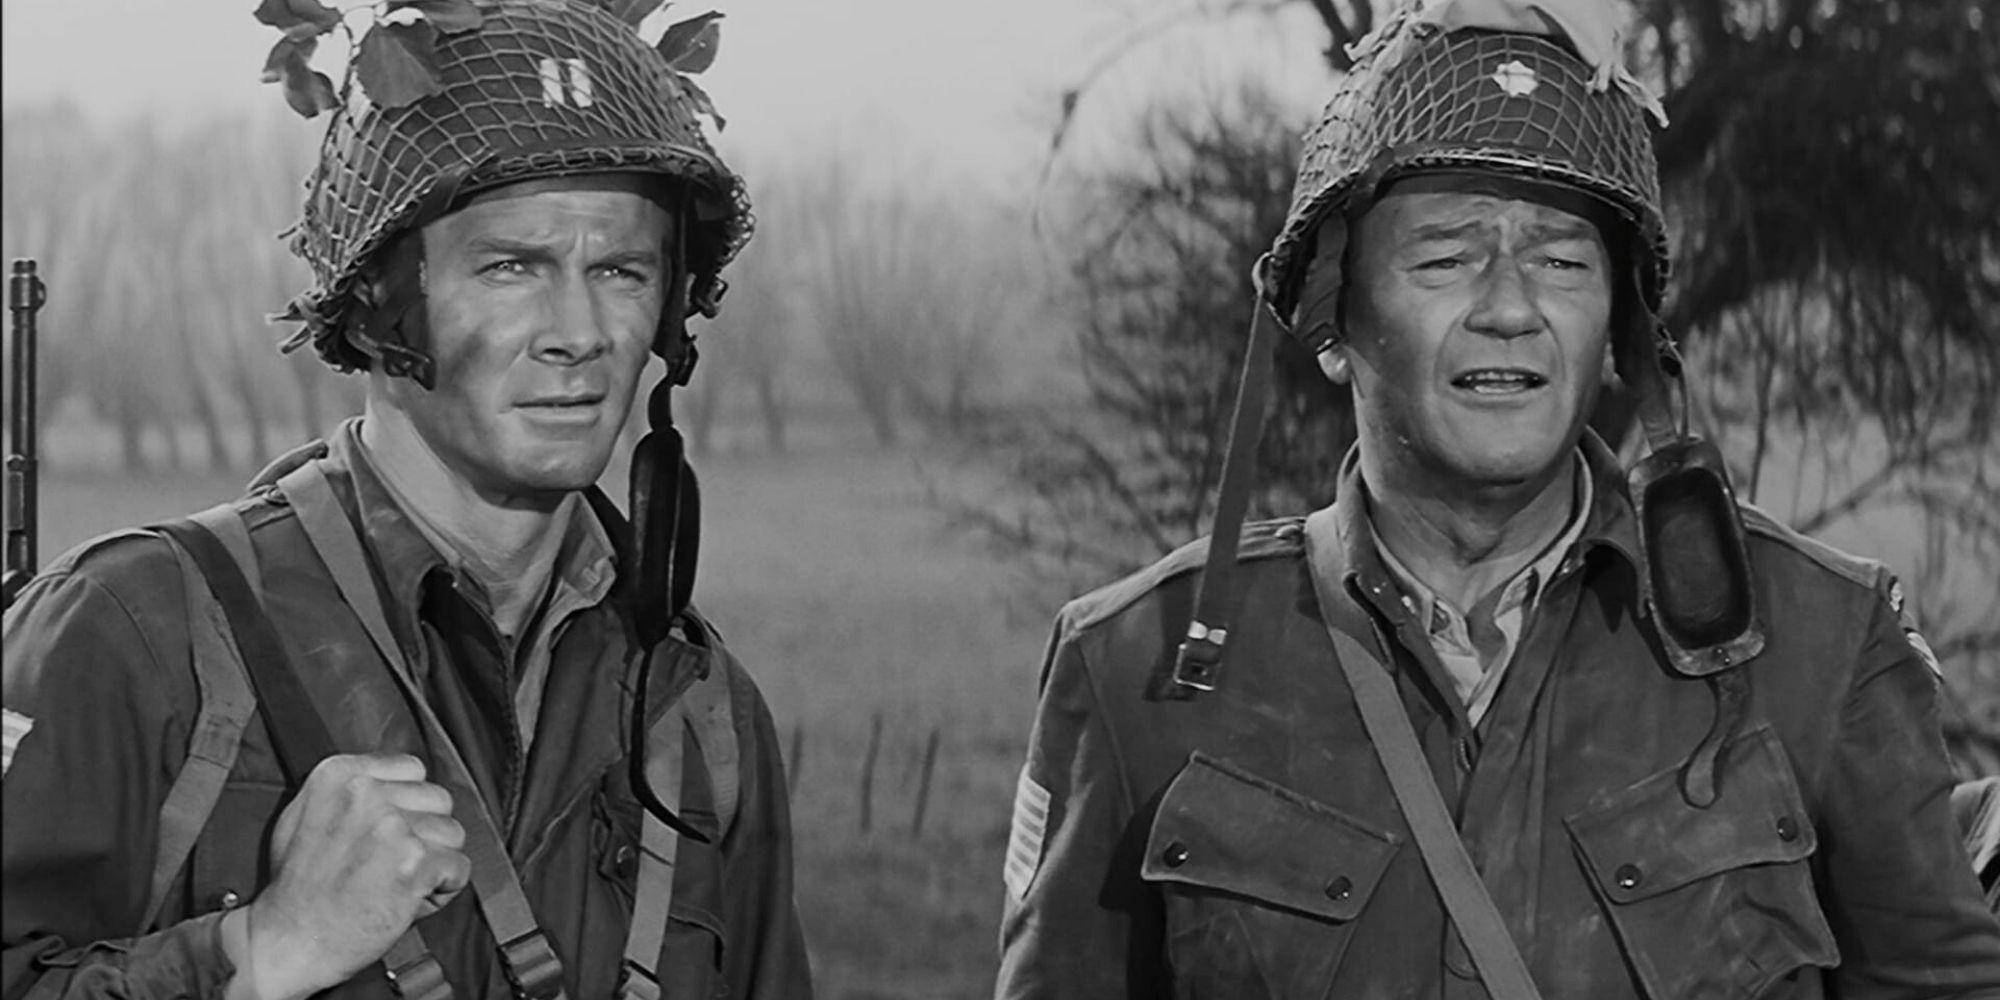 Two WW2 era paratroopers converse in "The Longest Day"